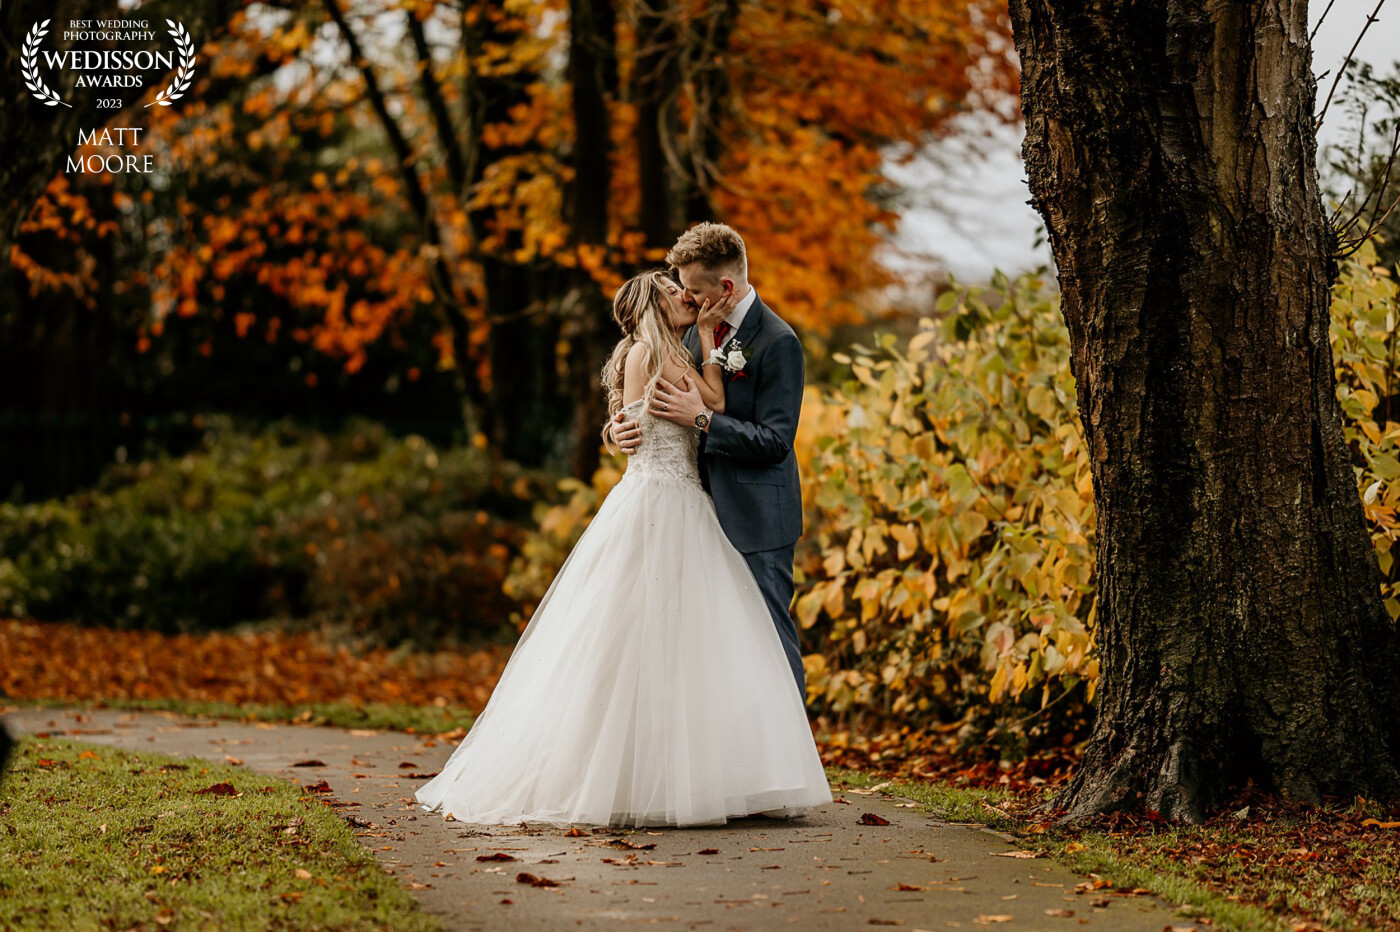 Winter colours were a must to capture for Joesph and Monica following their wedding in Derbyshire.